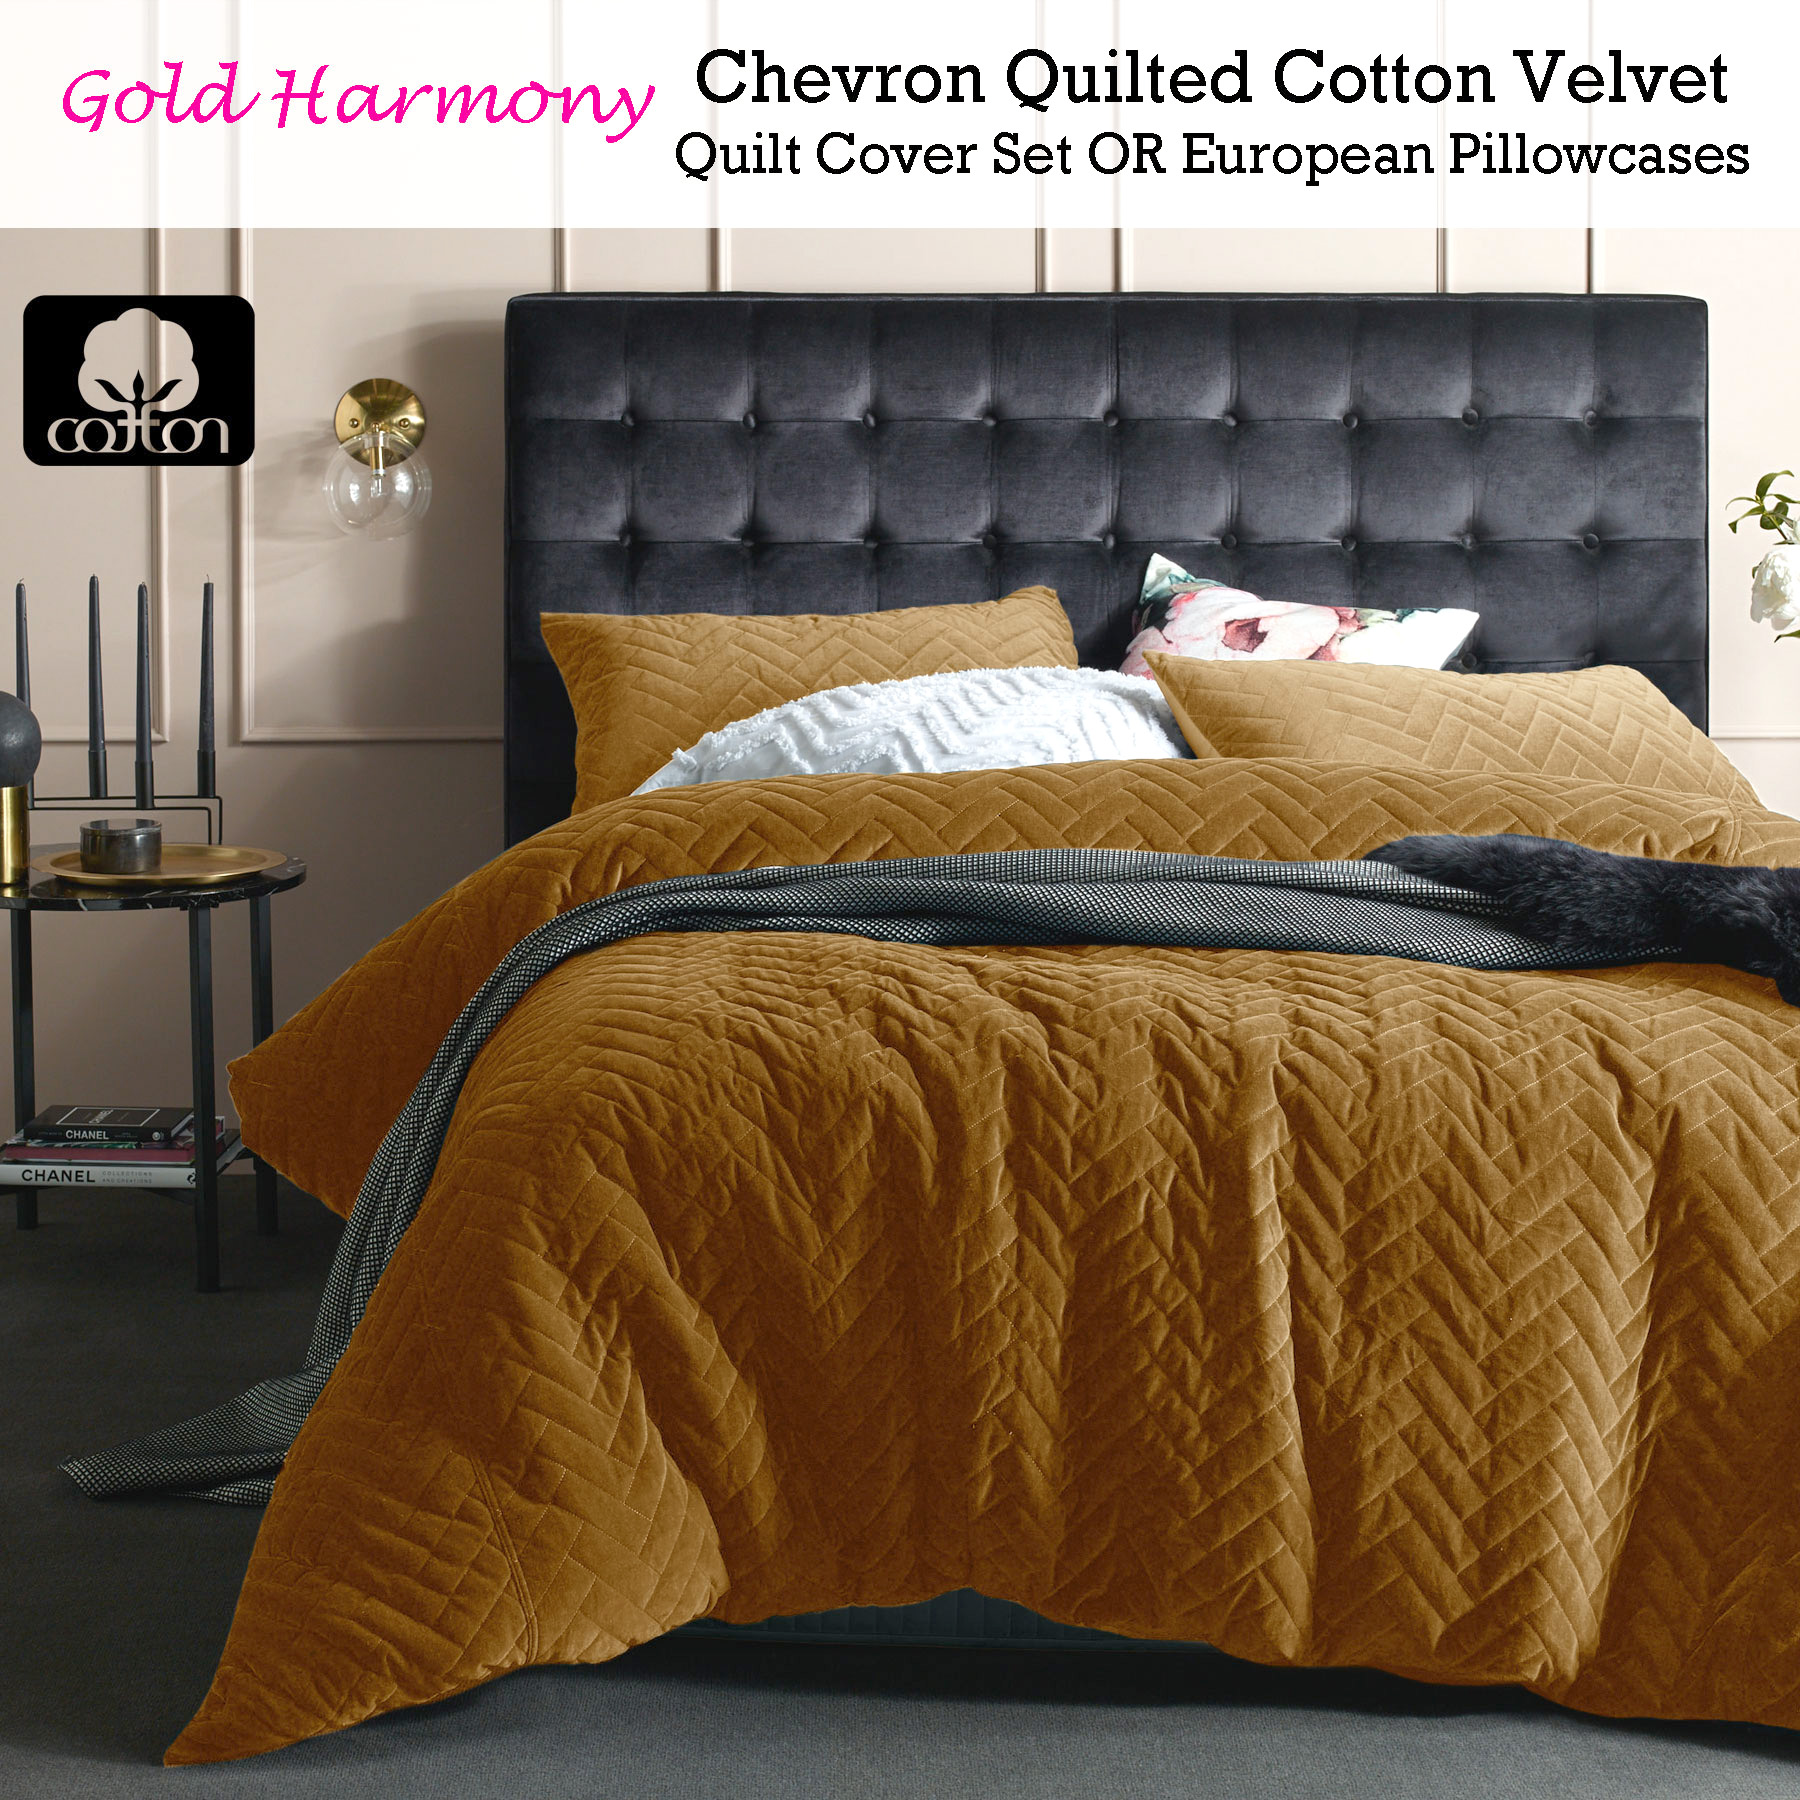 Gold Harmony Cotton Velvet Chevron Quilted Quilt Cover Set Or